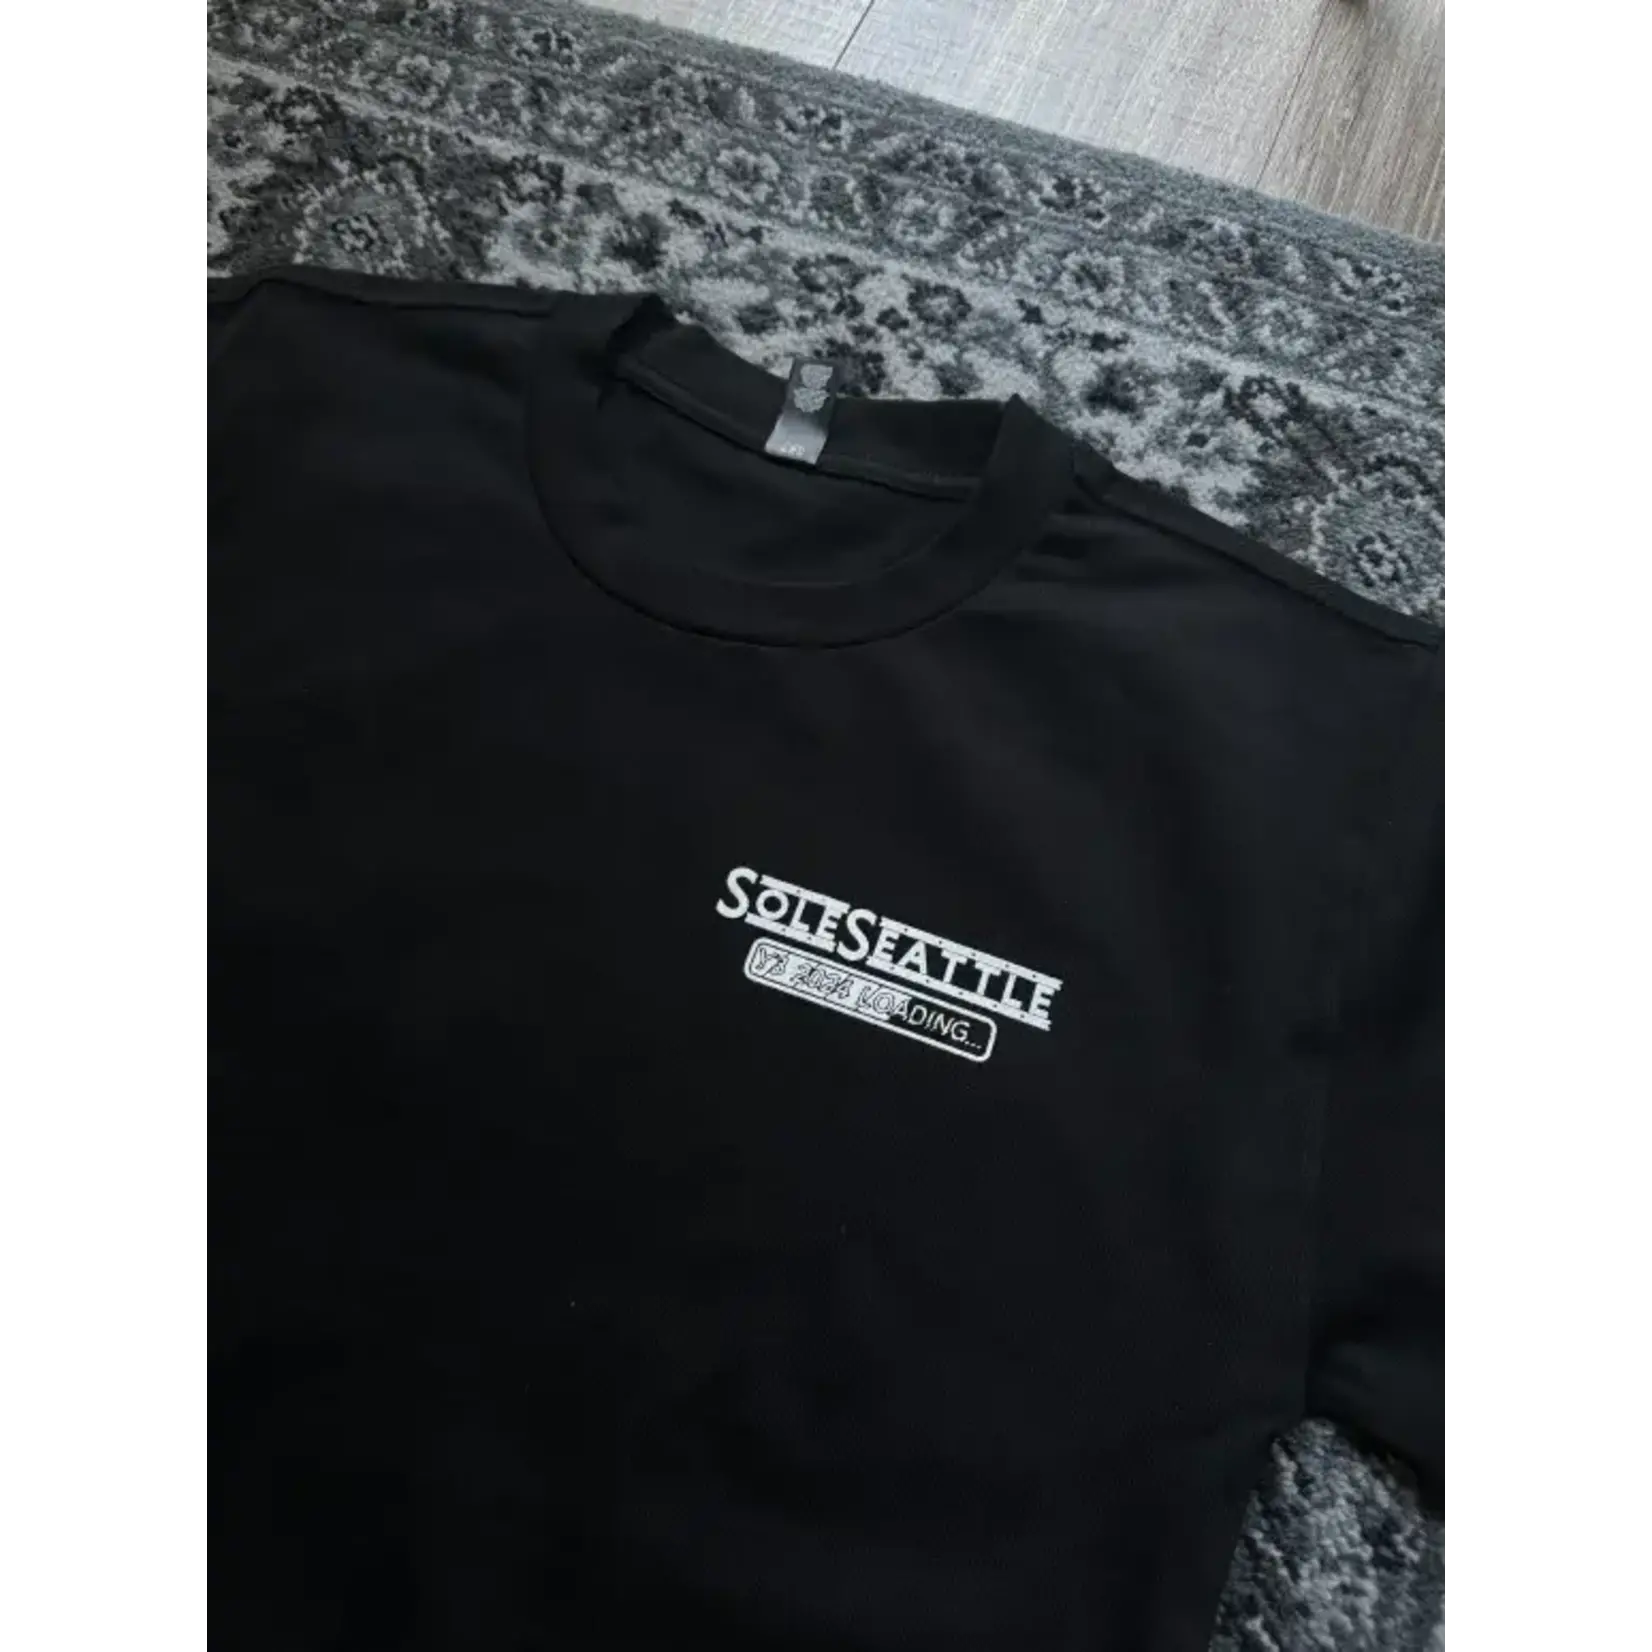 SOLESEATTLE SoleSeattle 3 Year Anniversary Tee Black Size Large, DS BRAND NEW